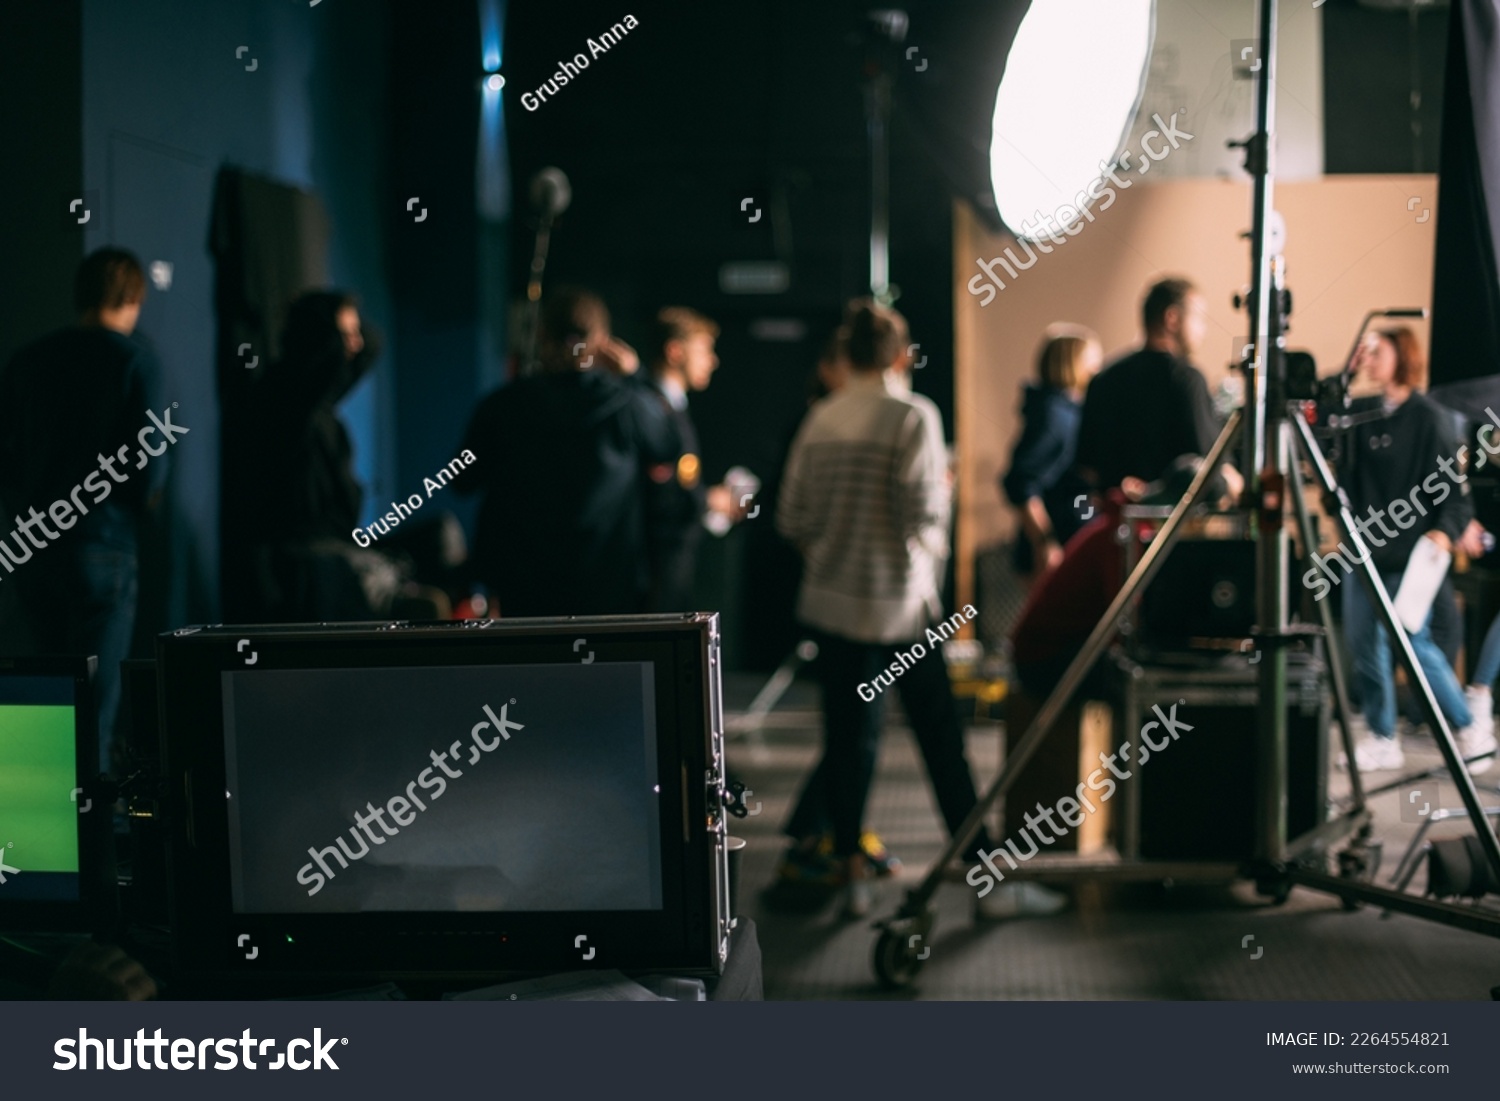 Film set, monitors and modern shooting equipment. Film crew, lighting devices, monitors, playbacks - filming equipment and a team of specialists in filming movies, advertising and TV series #2264554821